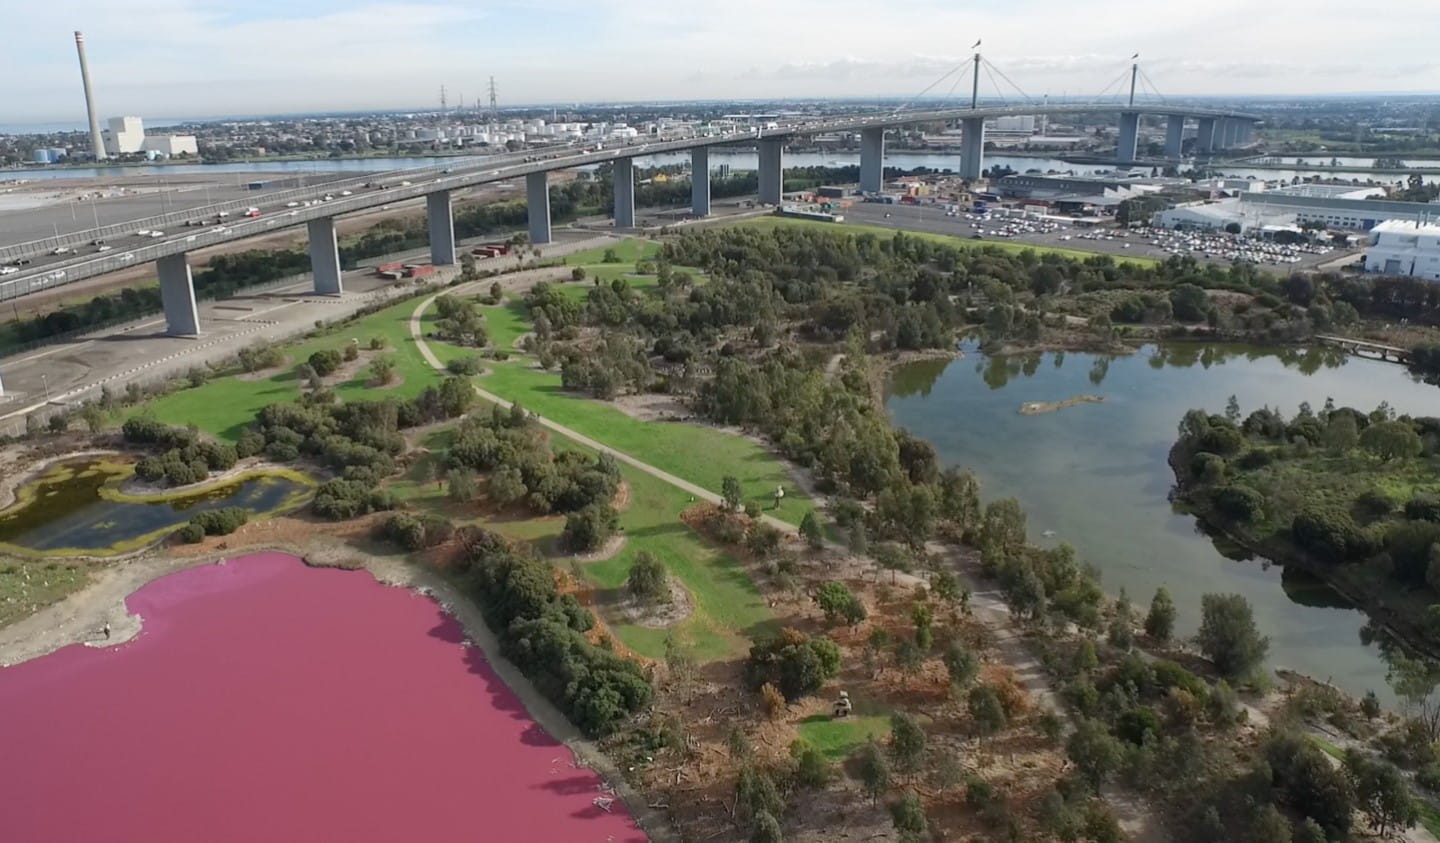 The salt lake in Westagte Park will turn bright pink when conditions are just right.